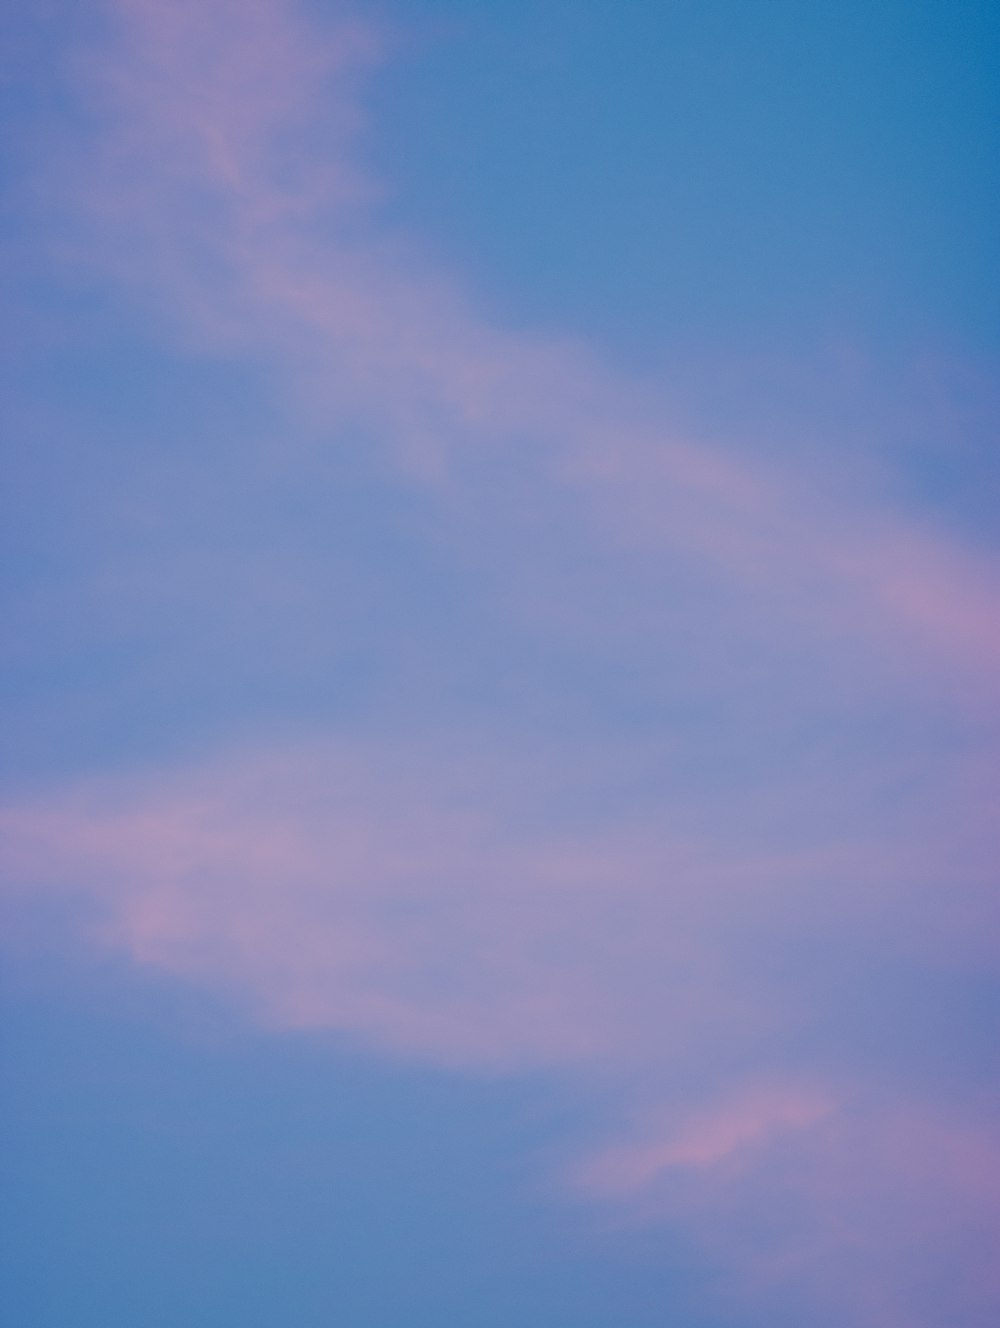 a plane flying in the sky with a pink cloud